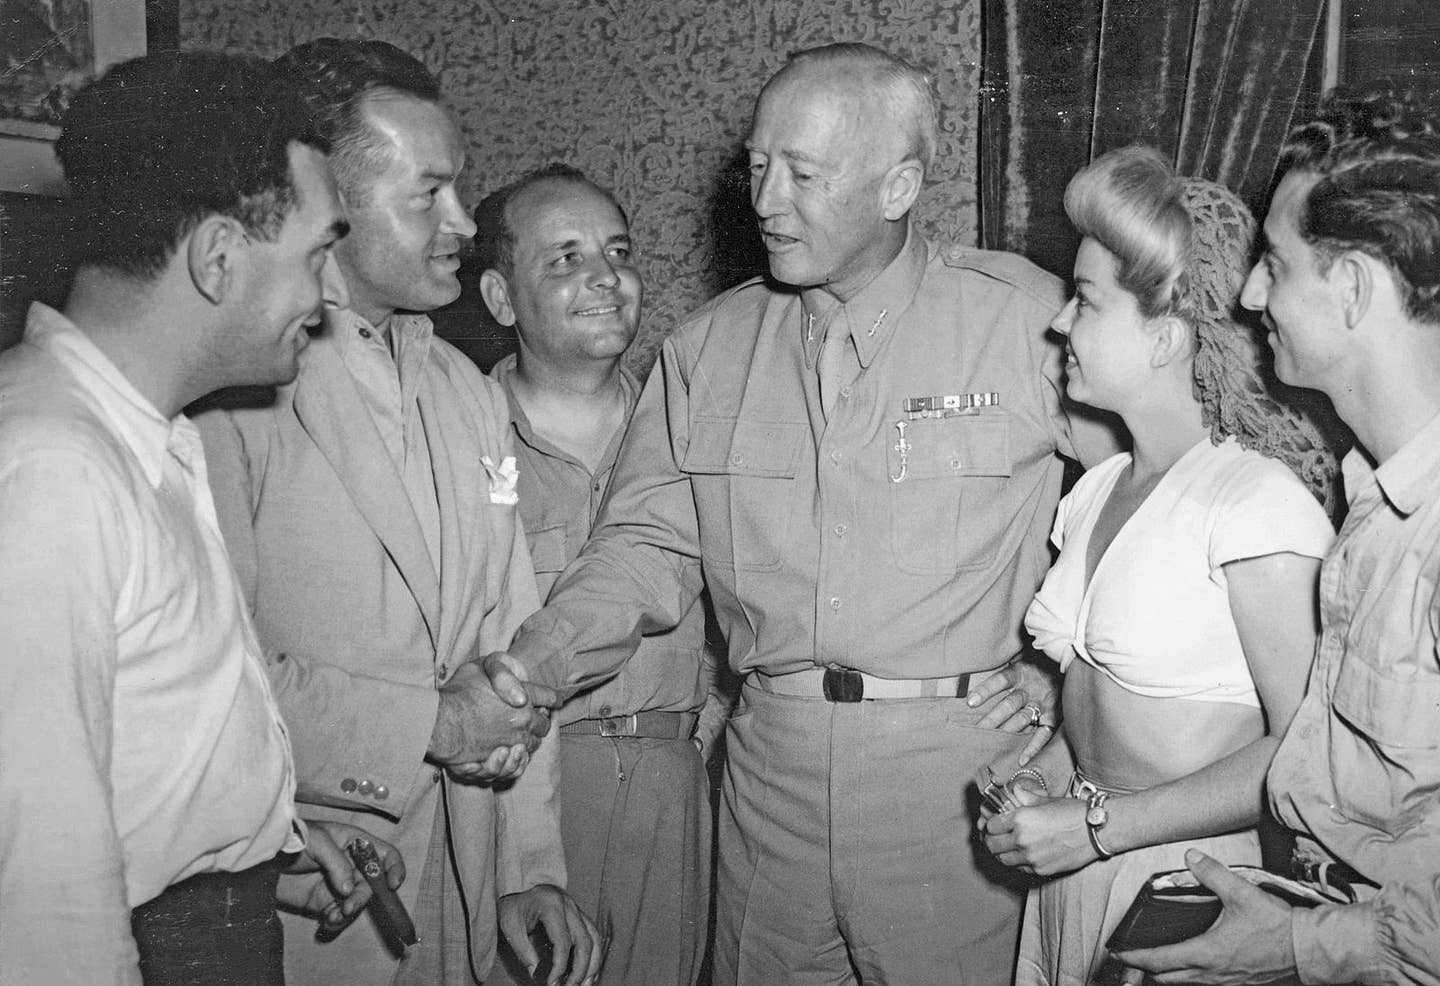 Bob Hope and his USO troupe arrived in Sicily three days after Gen. Patton and the Seventh Army took the key town of Messina. (Public domain)